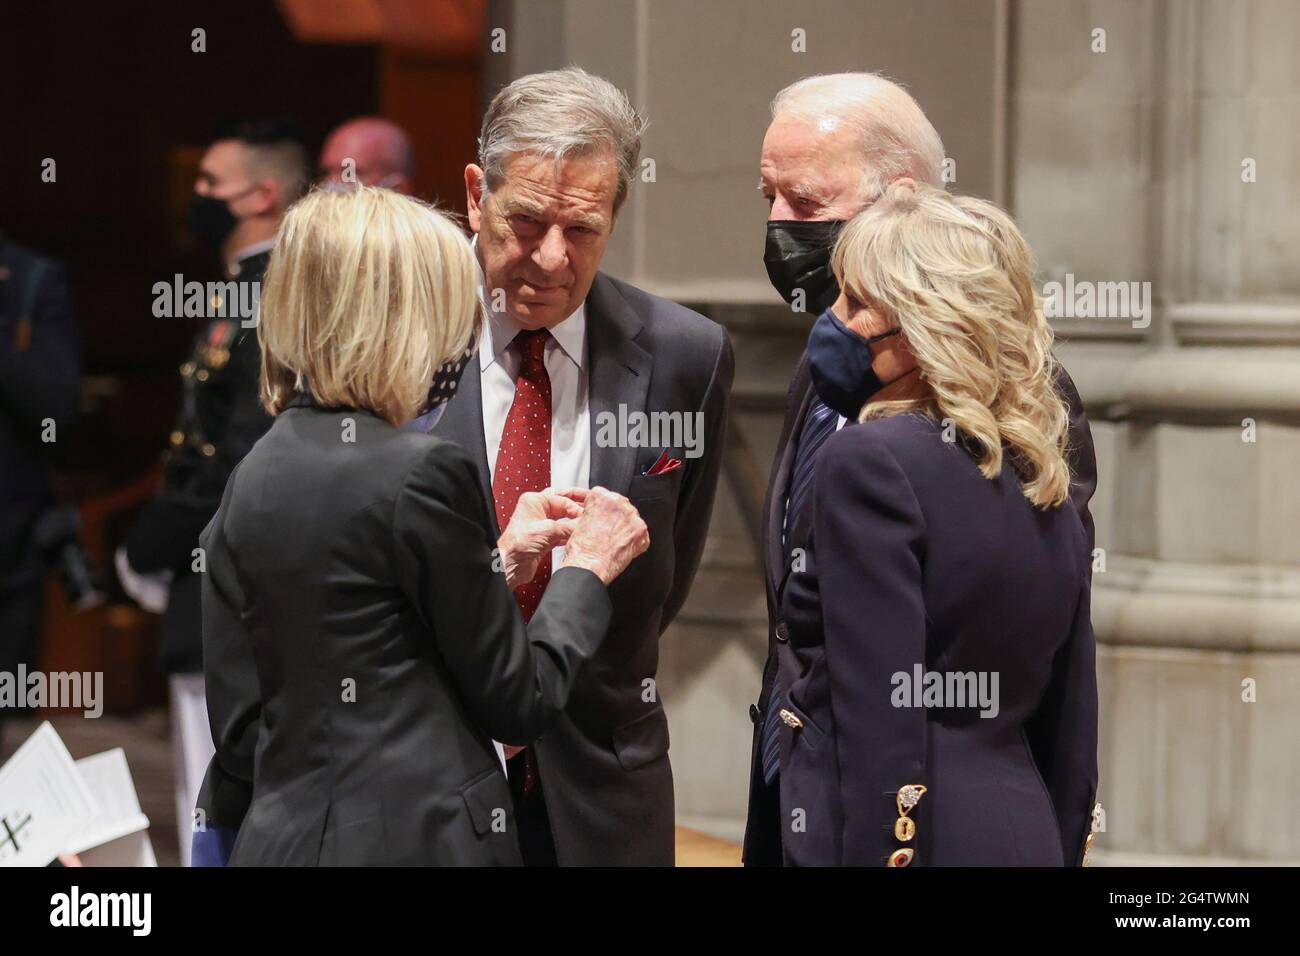 Paul Pelosi stands with President Joe Biden and first lady Jill Biden as they listen to a guest at the funeral ceremony of former Senator John Warner at Washington National Cathedral in Washington, DC, U.S. June 23, 2021. Oliver Contreras/Pool via REUTERS Stock Photo